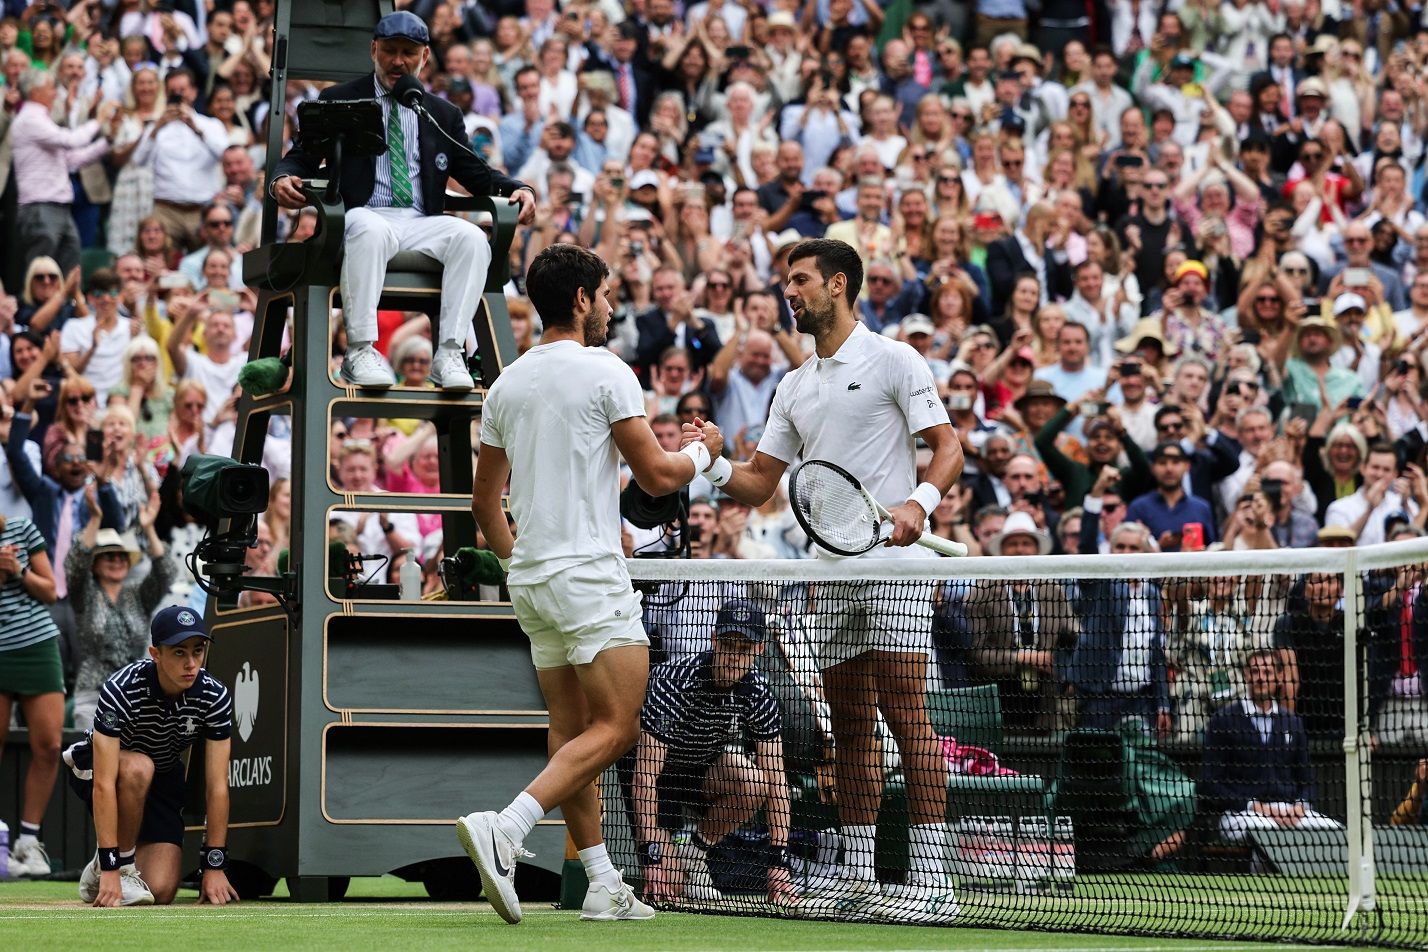 In Final For The Ages, Alcaraz Beats Djokovic To Win Maiden Wimbledon Title 